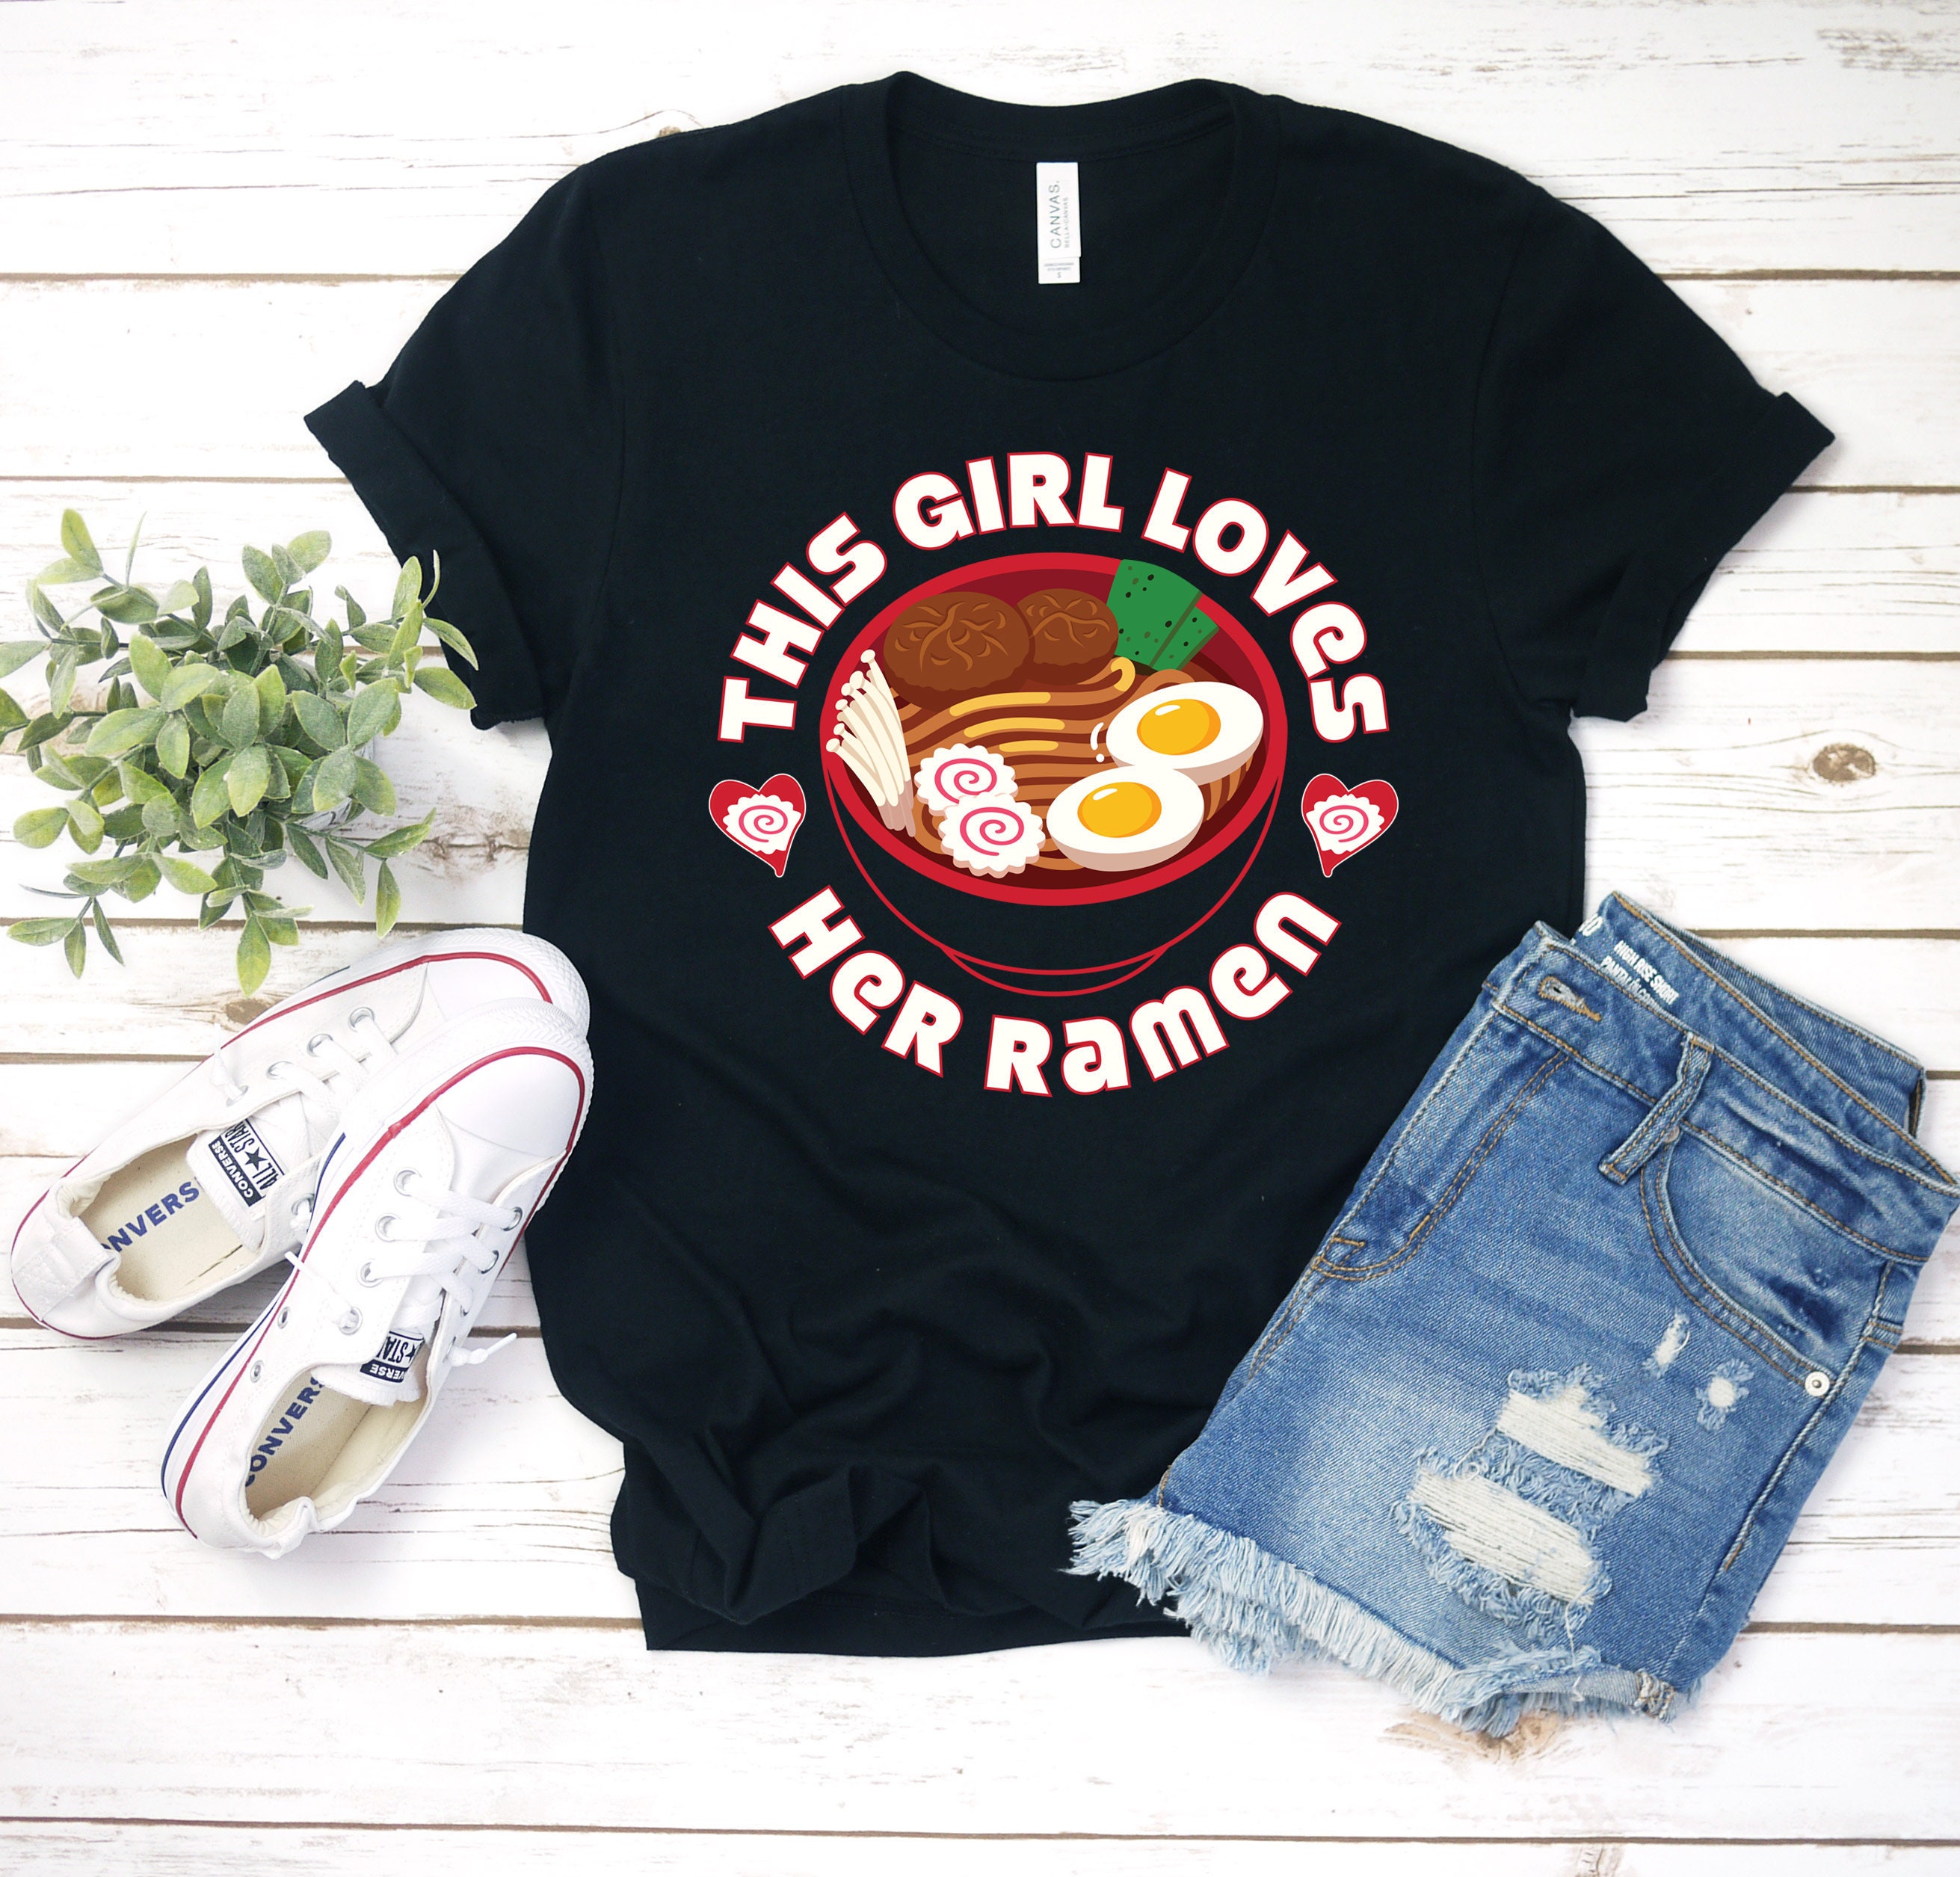 Ramen Japanese Noodles T-Shirt, Funny Lover, Foodie Cute Tee, Soup Bowl, Gifts, Birthday Present, Tank Top, Hoodie